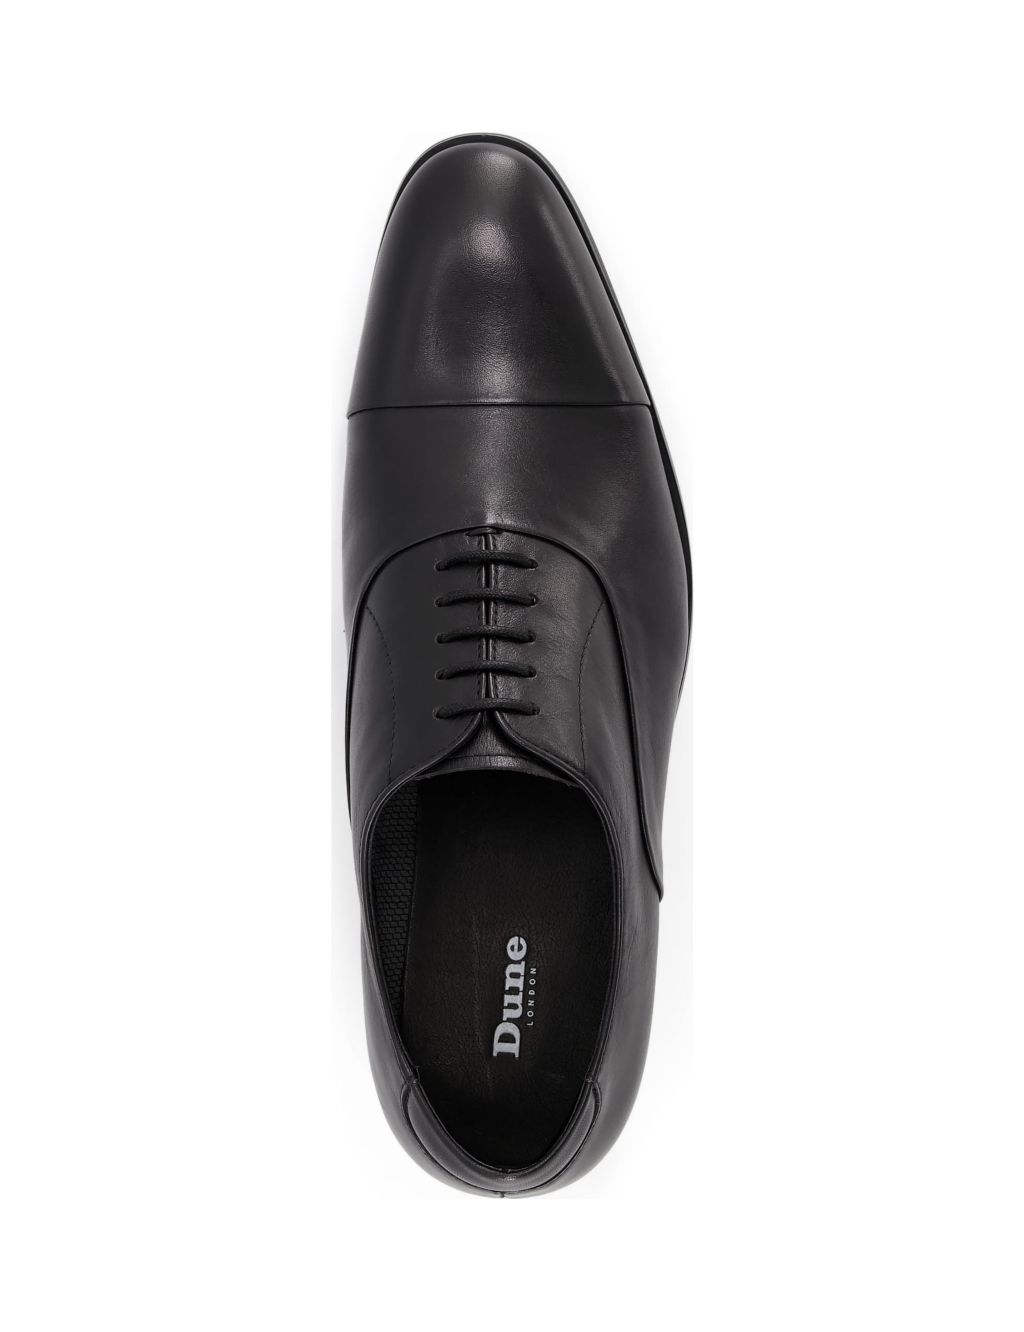 Leather Oxford Shoes image 4